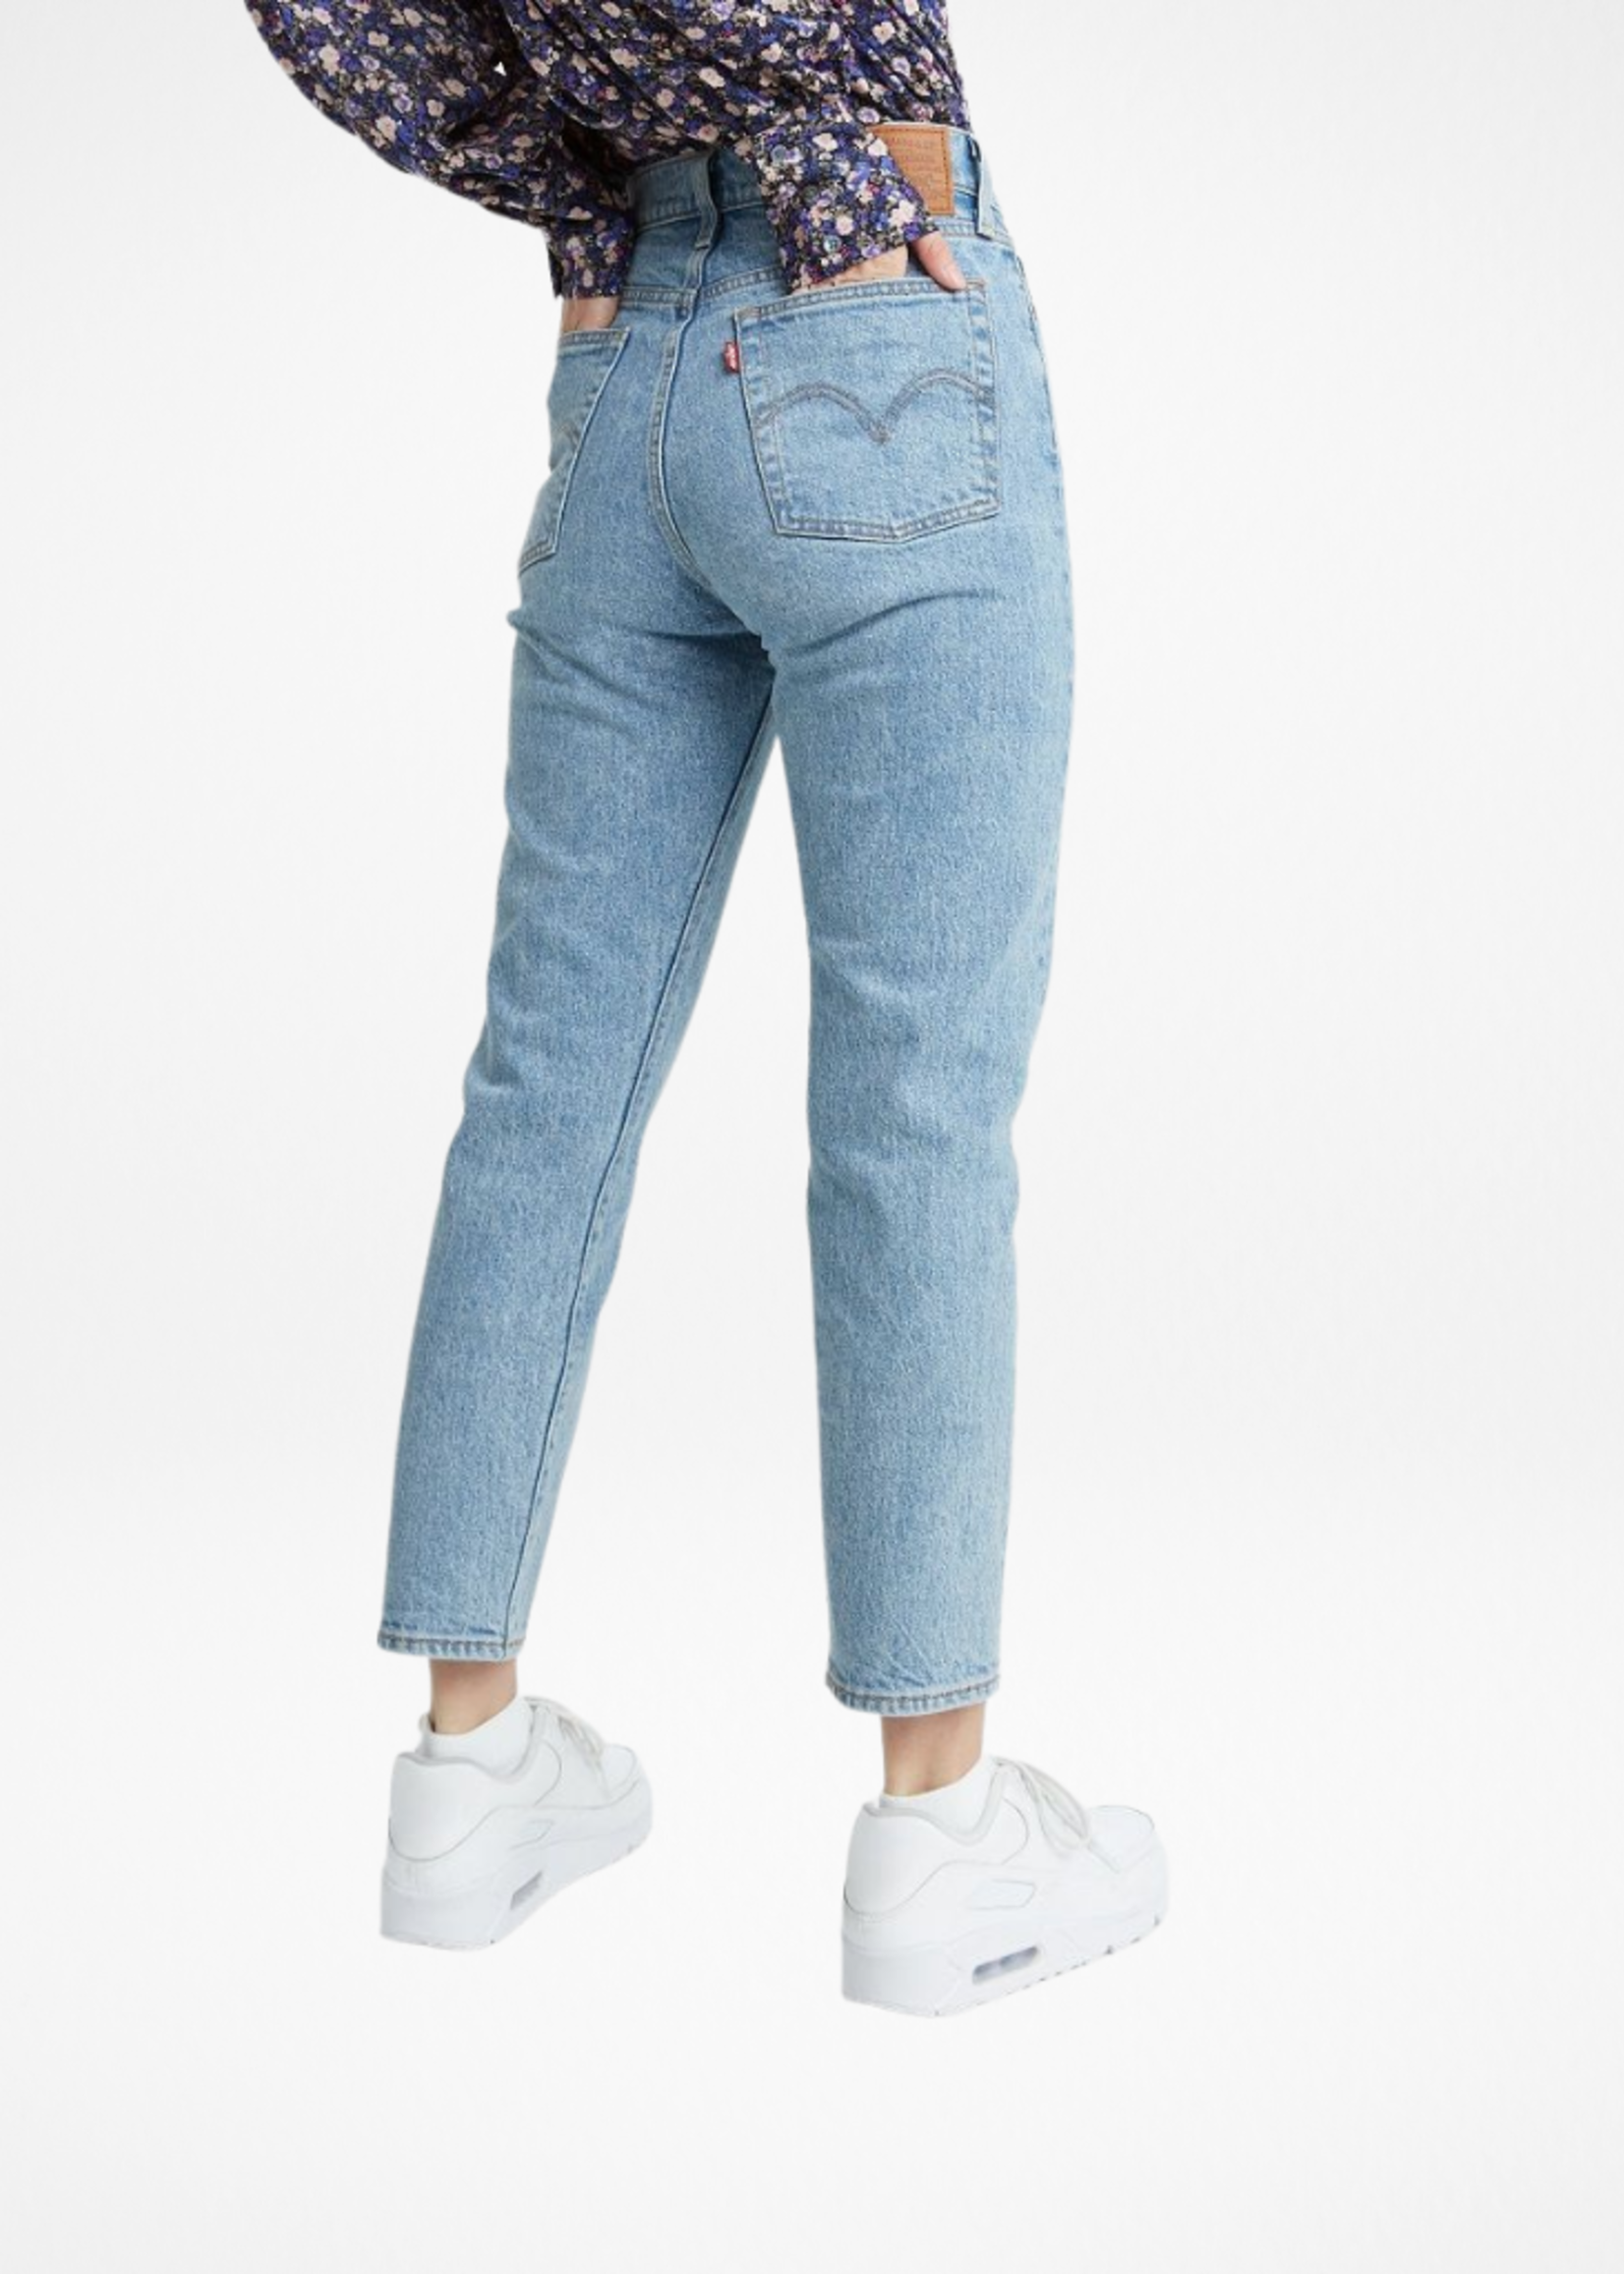 LEVI'S LEVI'S WEDGIE ICON FIT